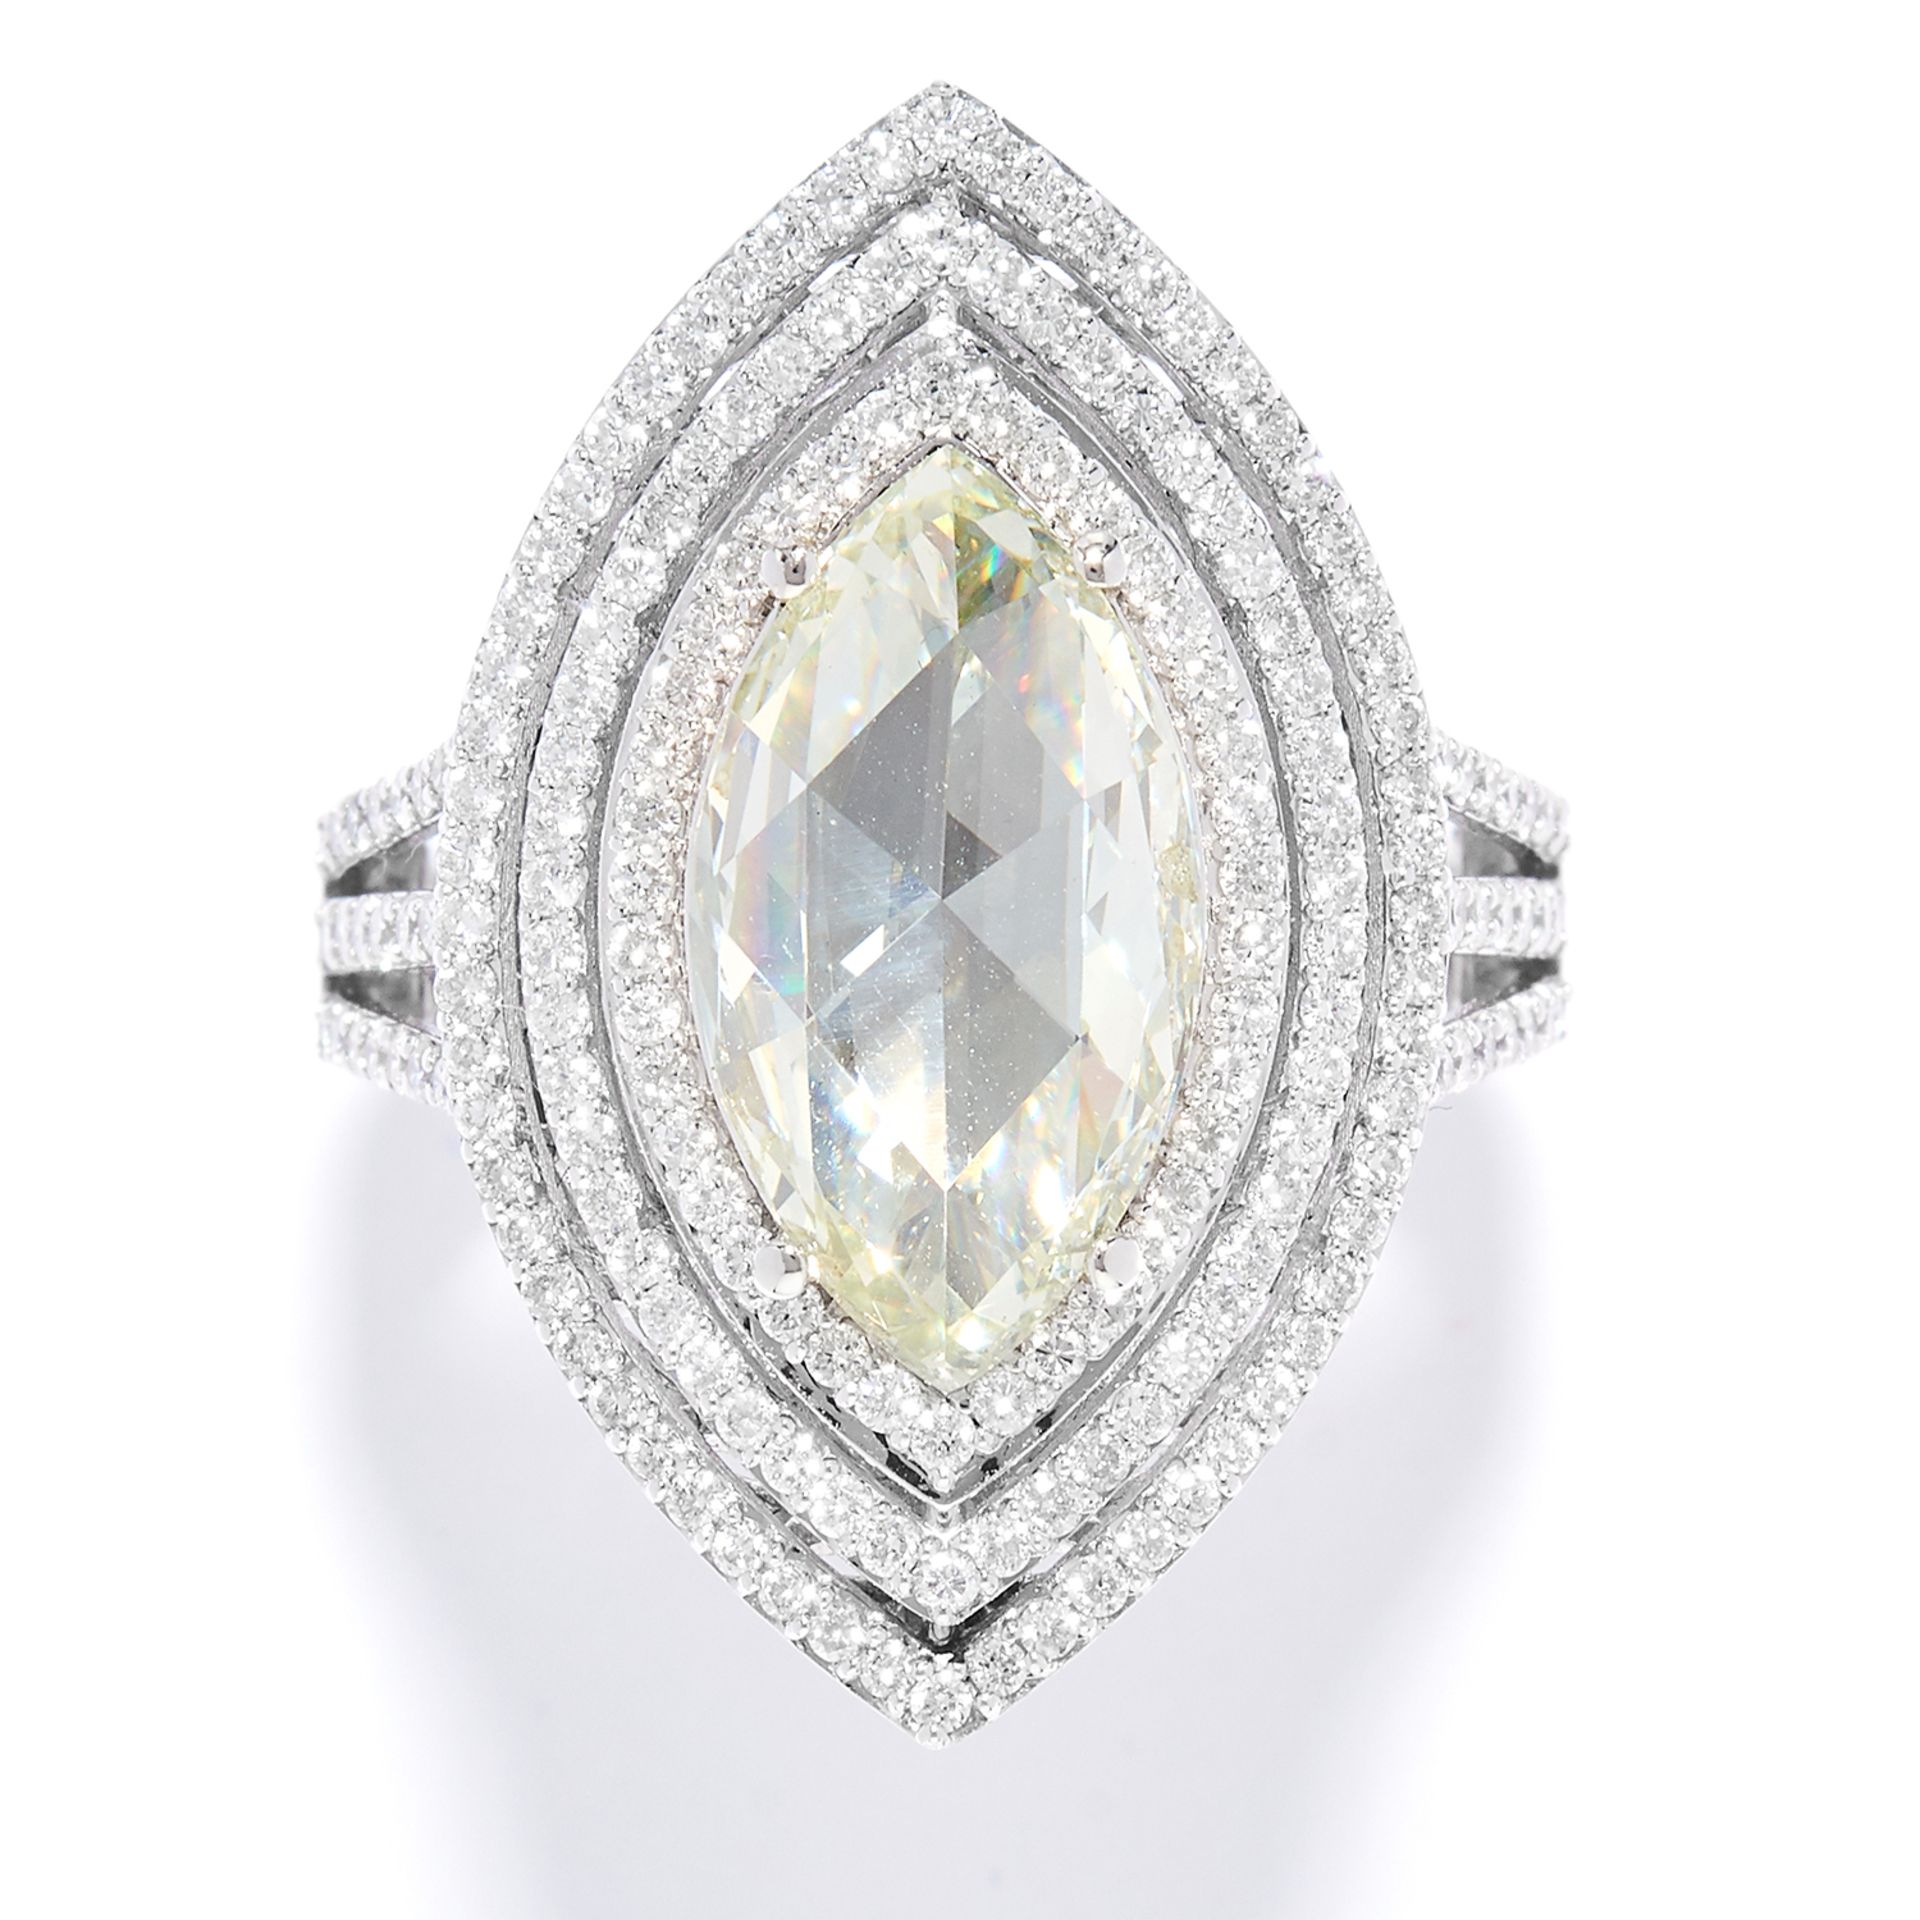 3.02 CARAT DIAMOND DRESS RING in 18ct white gold, set with a marquise rose cut diamond of